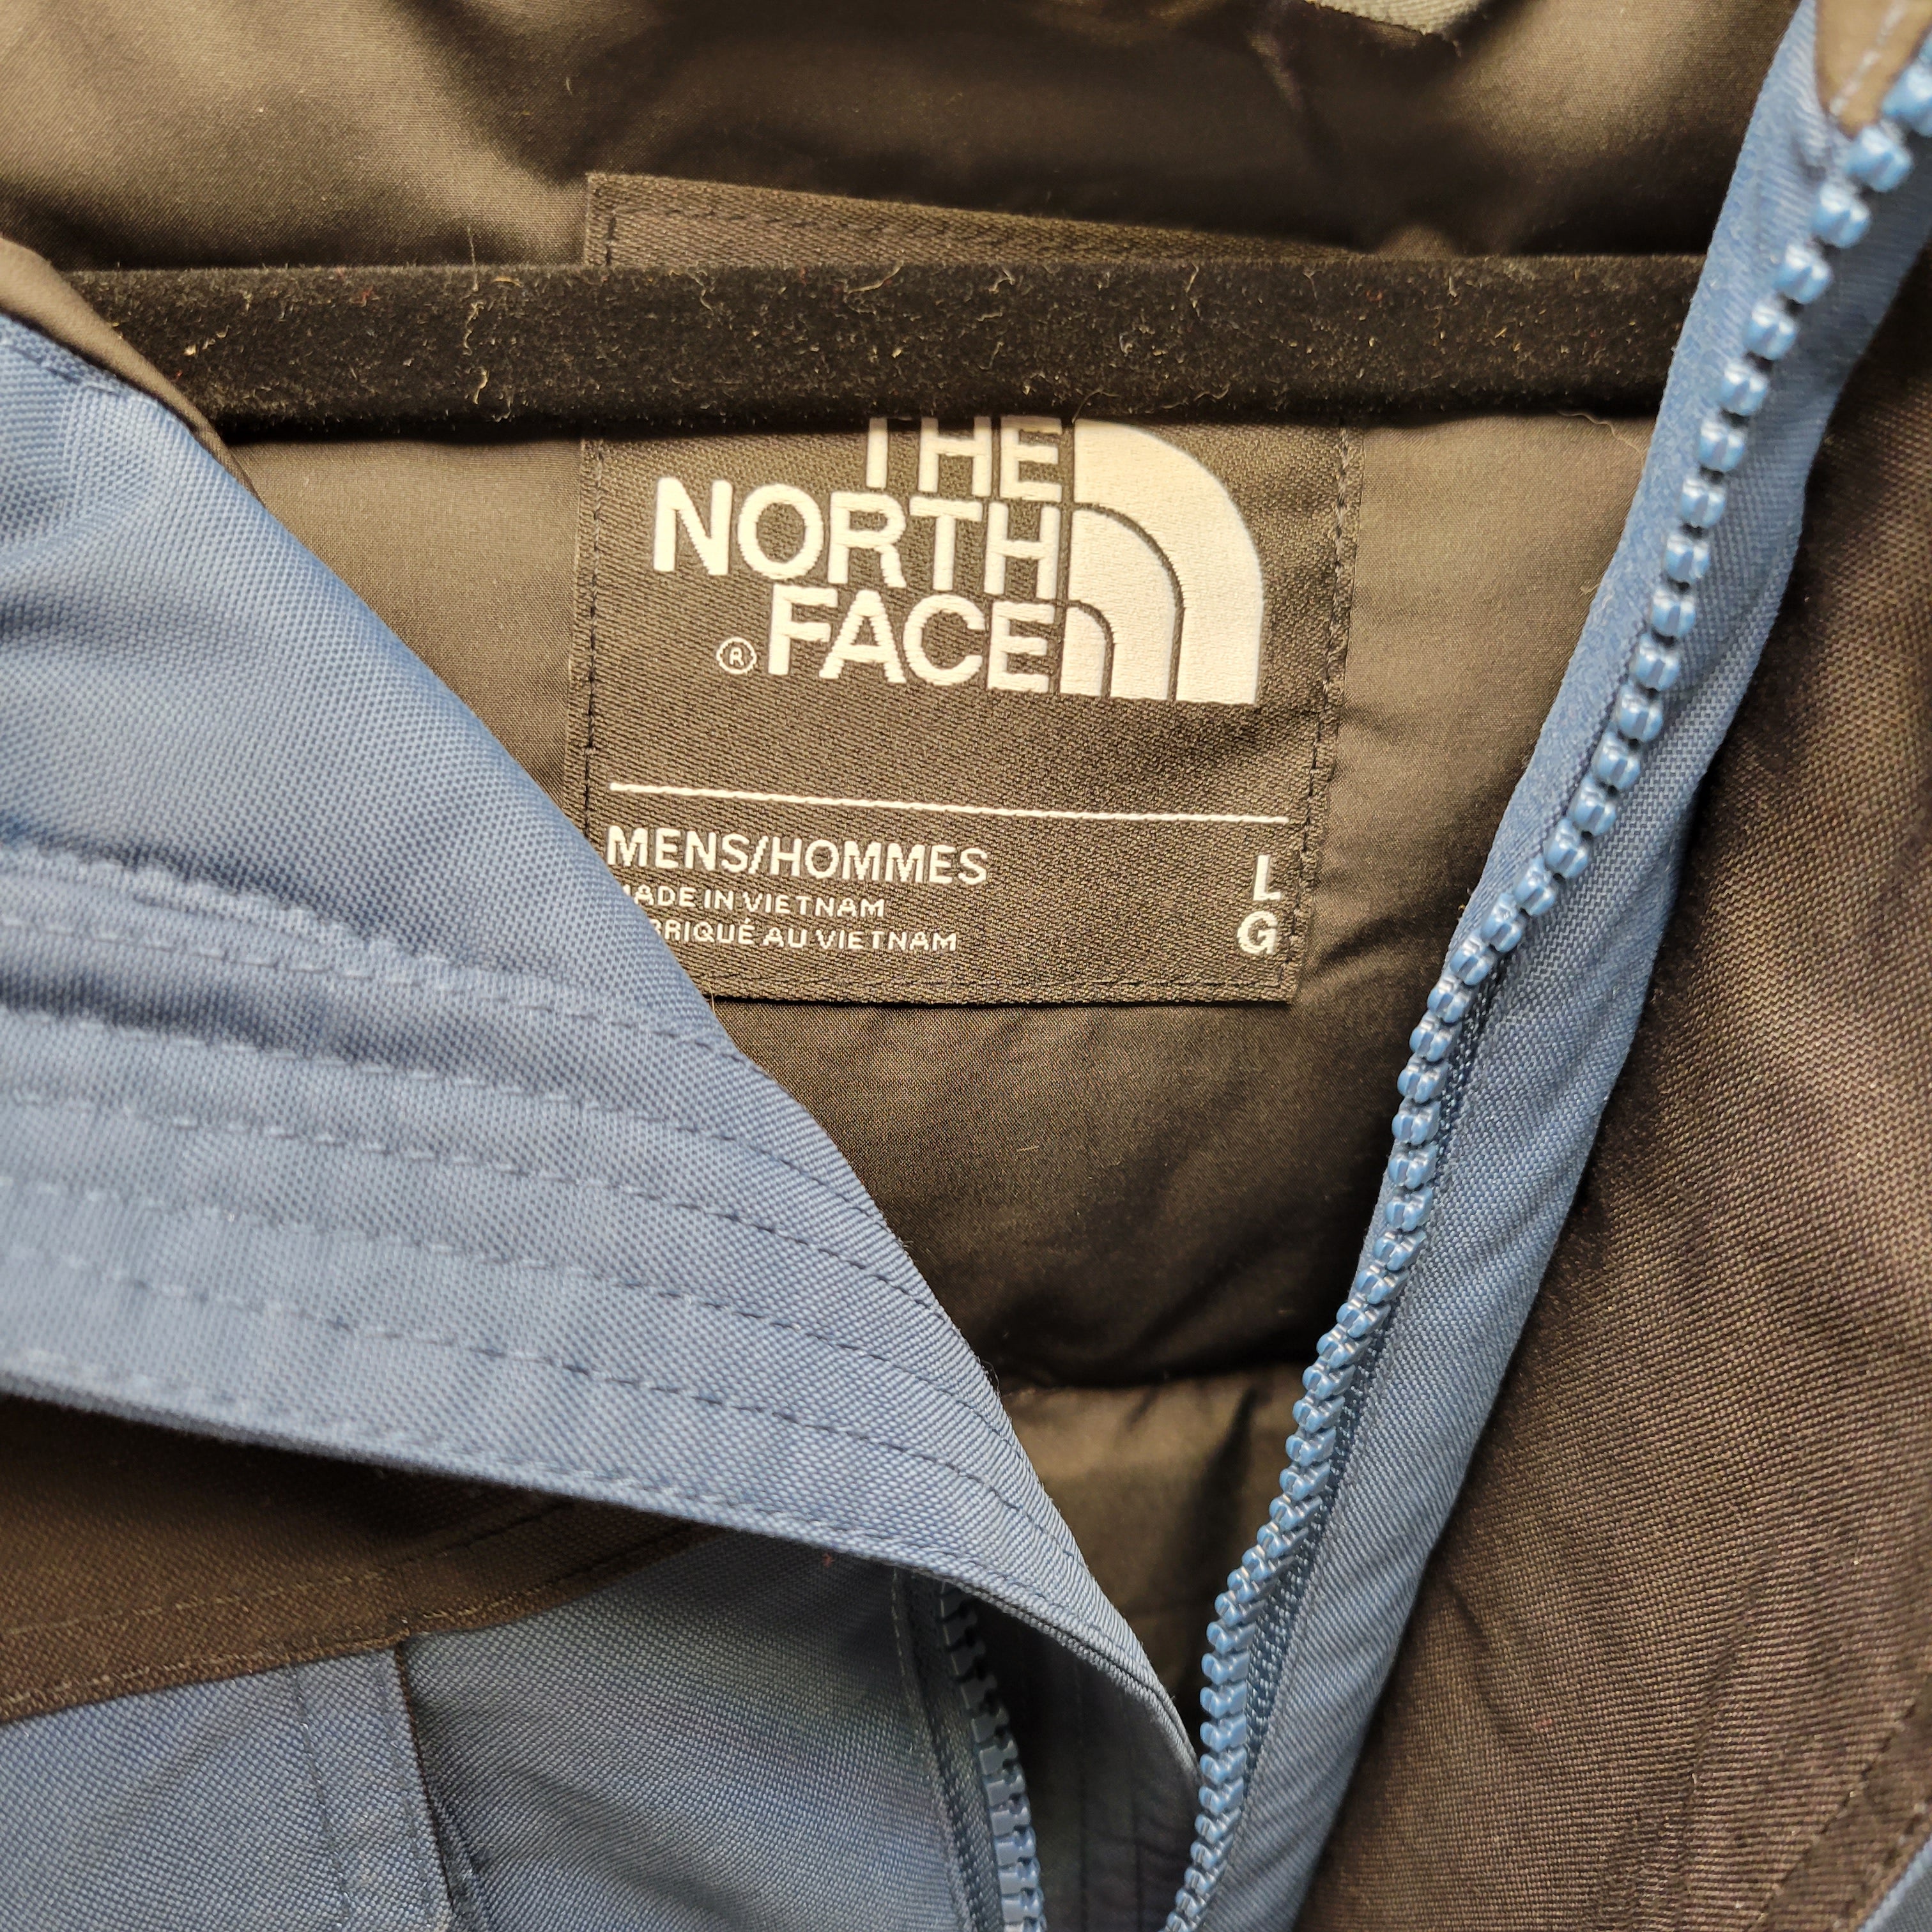 The North Face Men's Gotham Insulated Jacket III, Large Blue/Teal/Black (7624424784110)